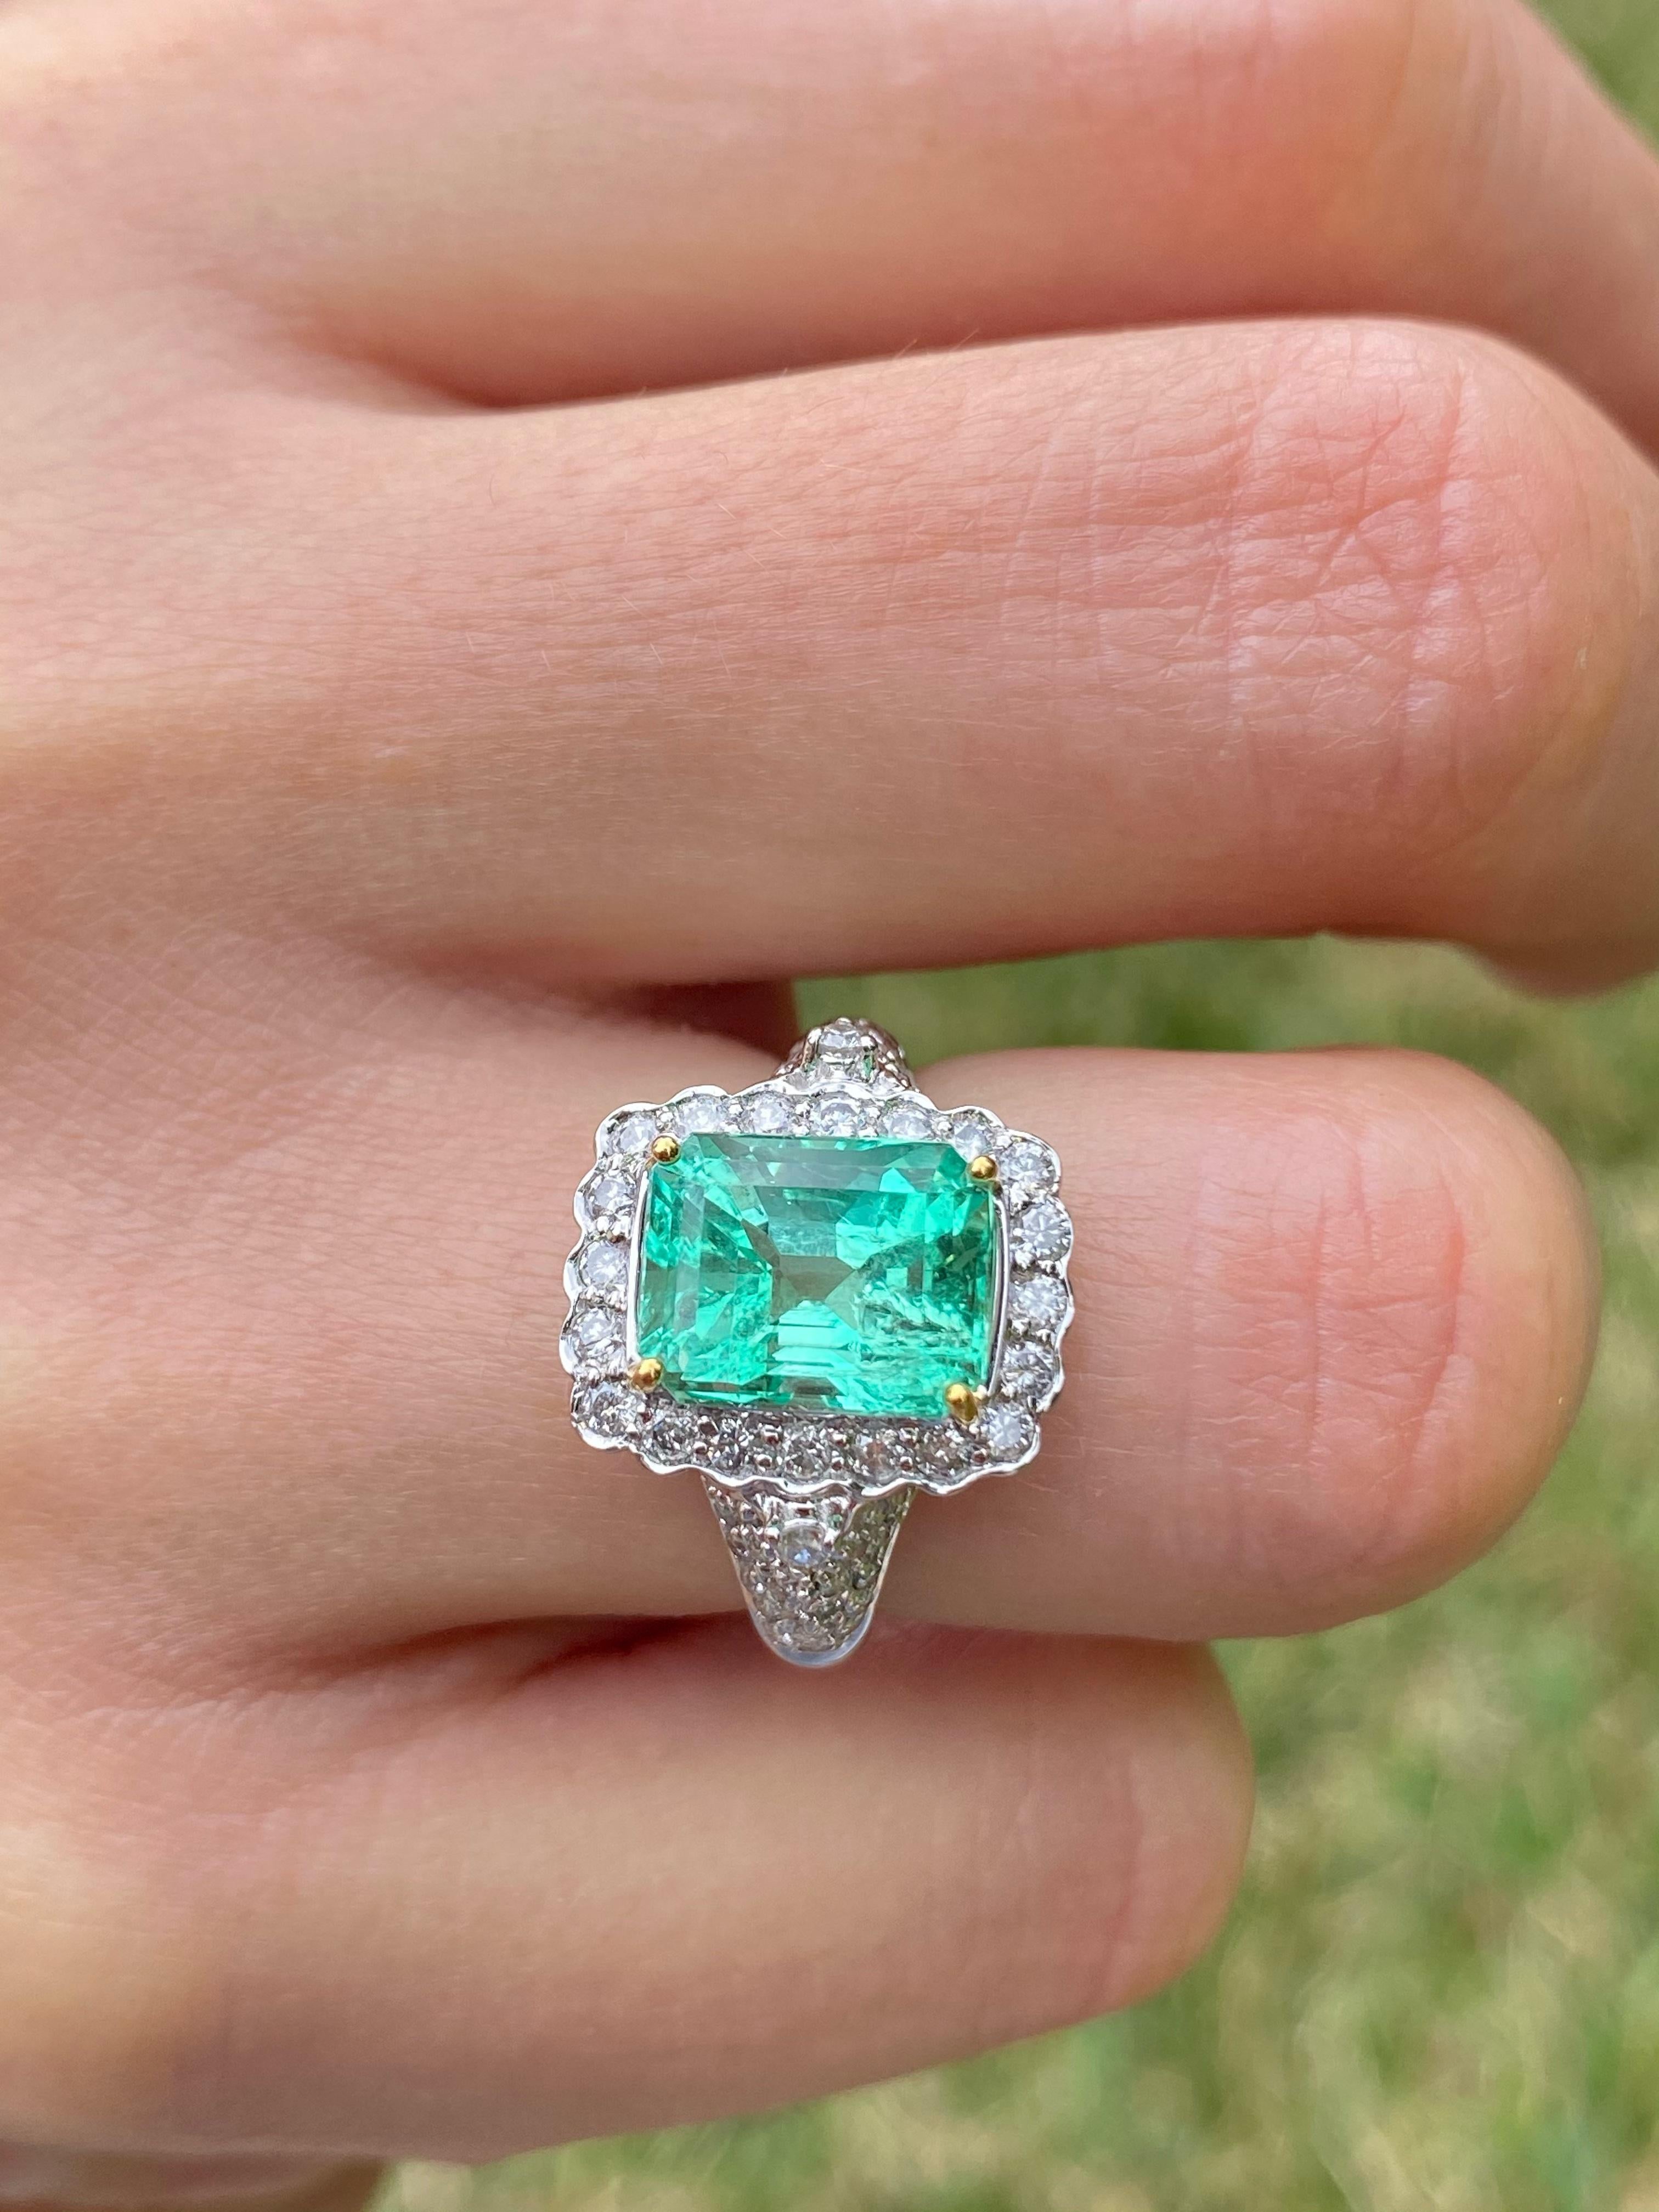 3.58 Carat Emerald-Cut Colombian Emerald in 18 Karat White Gold Ring In Excellent Condition For Sale In Miami, FL